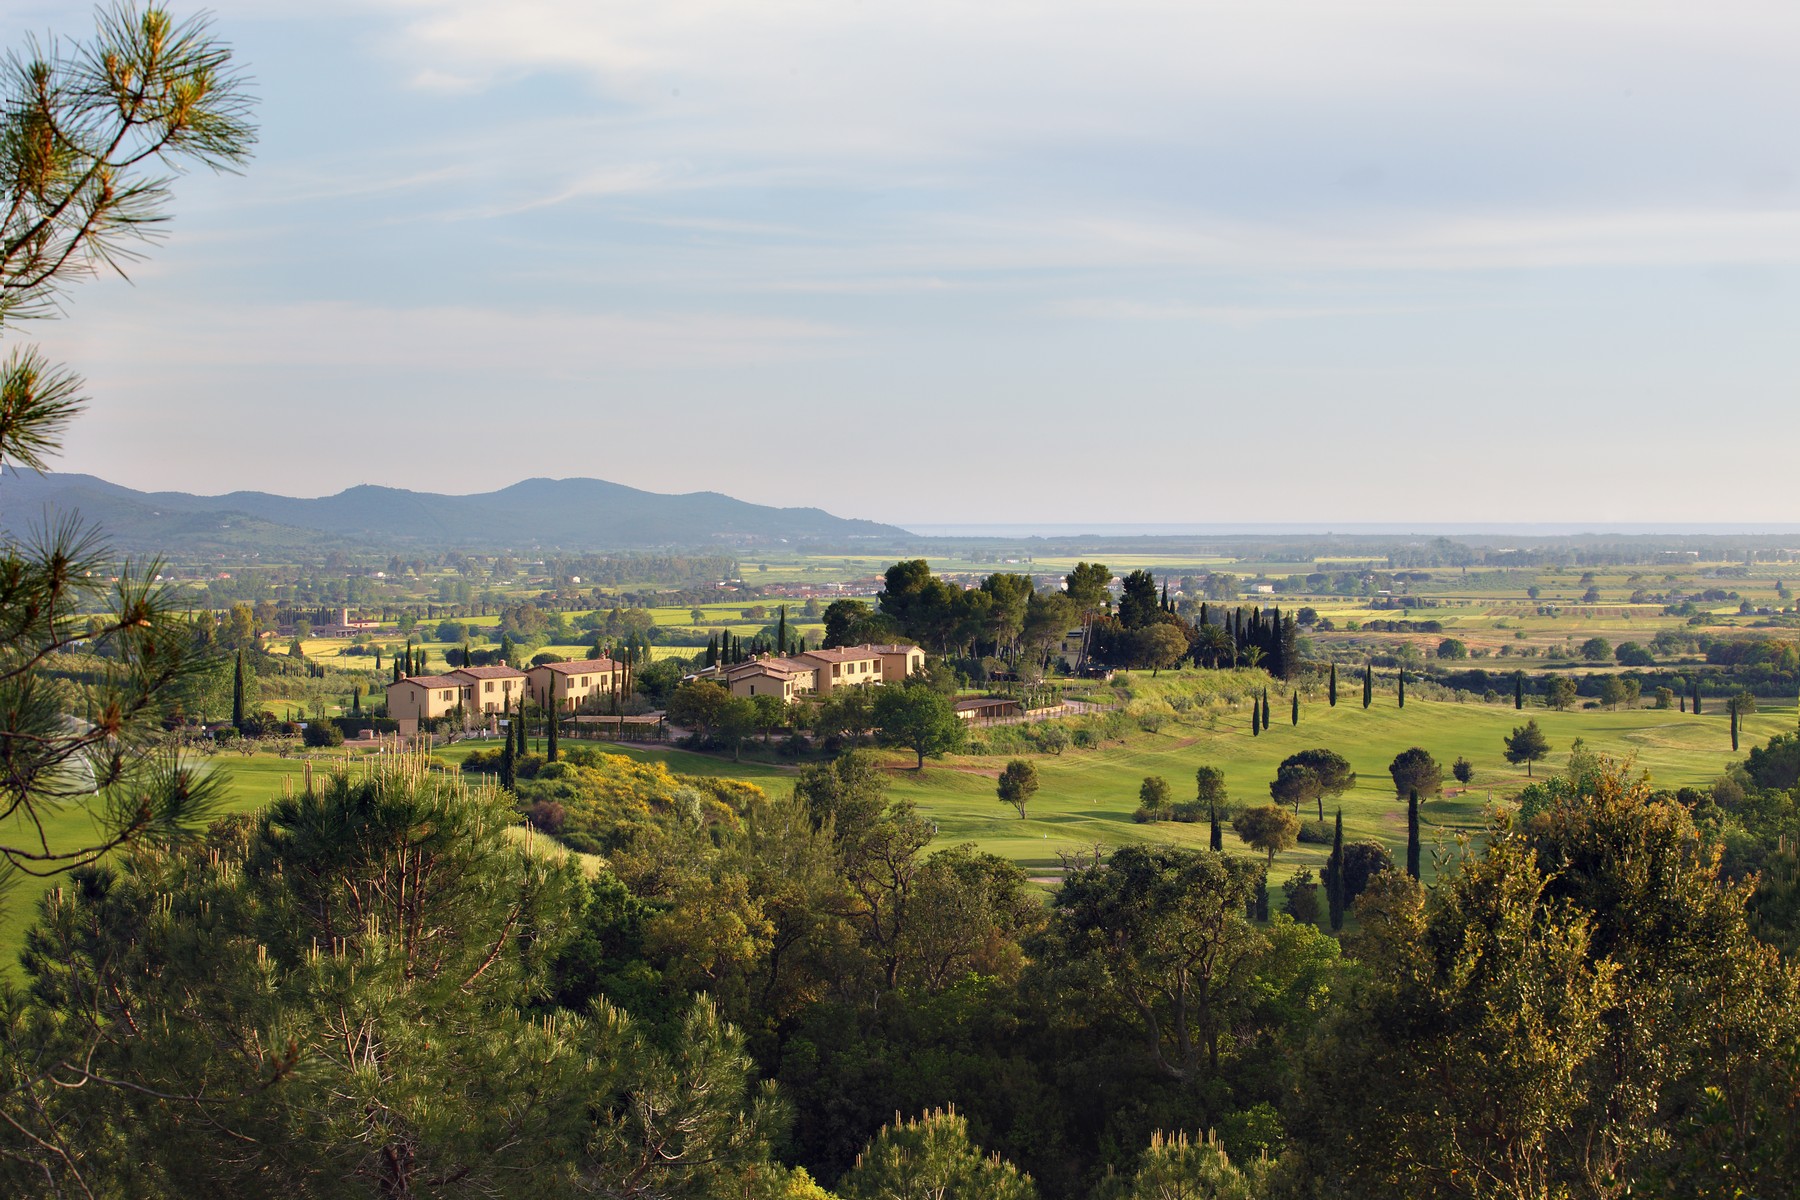 New farmhouses in the Tuscan hills